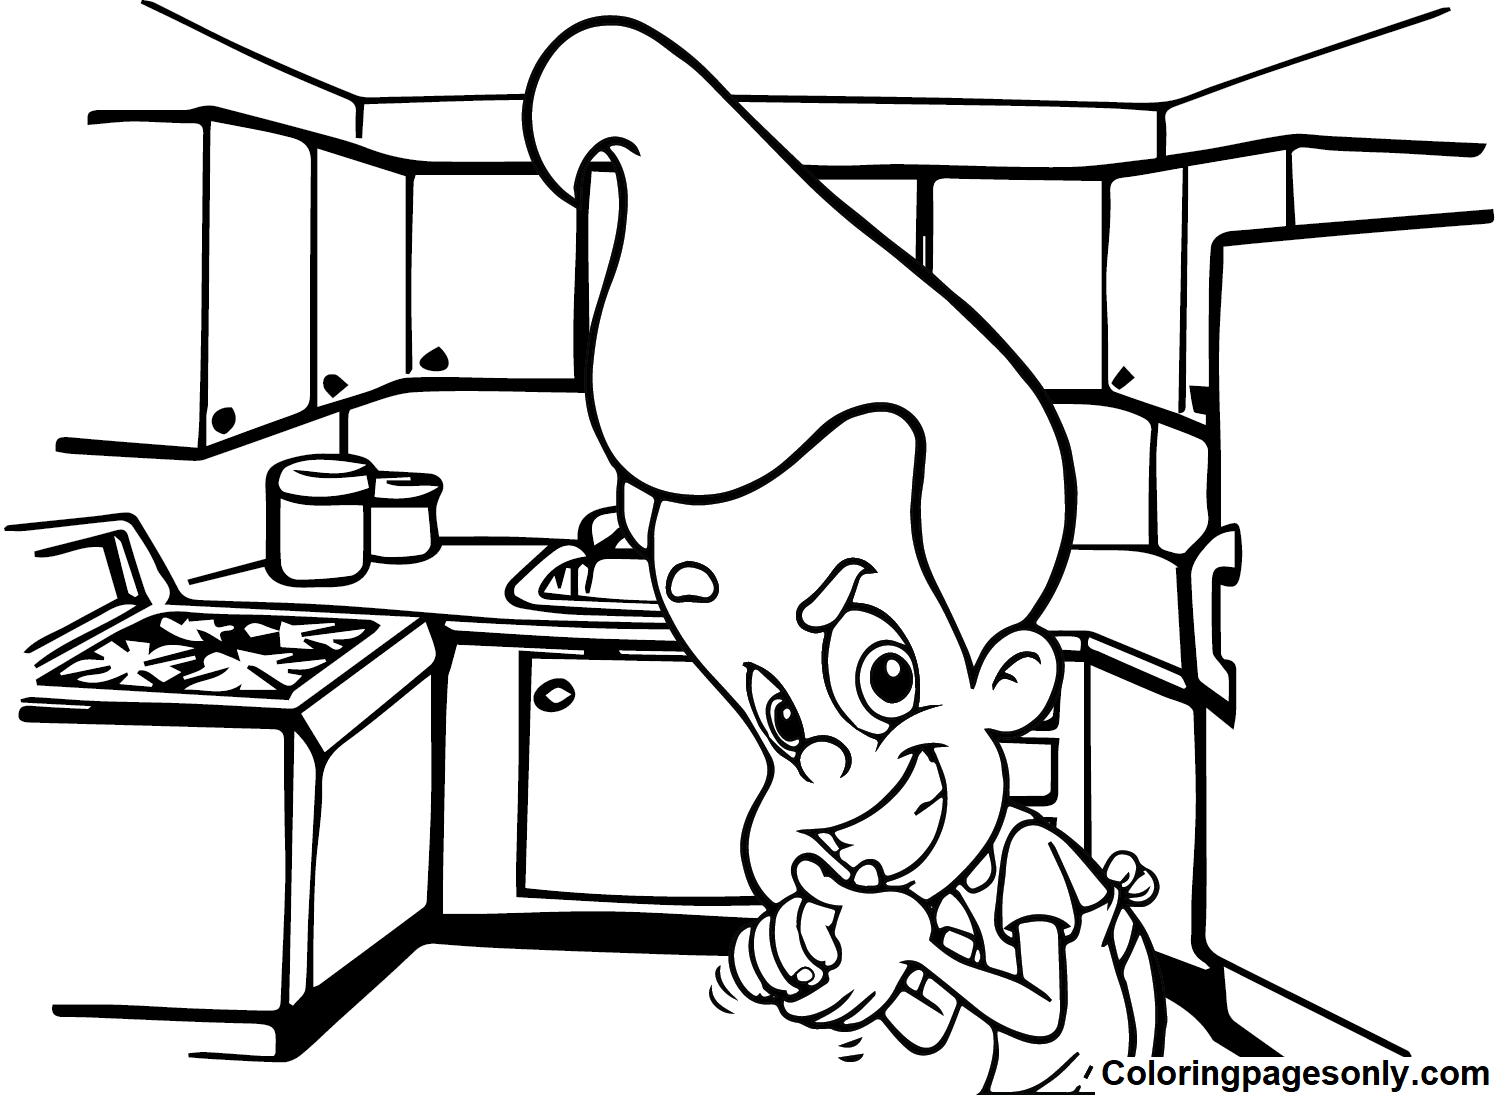 Funny Jimmy Neutron Coloring Page